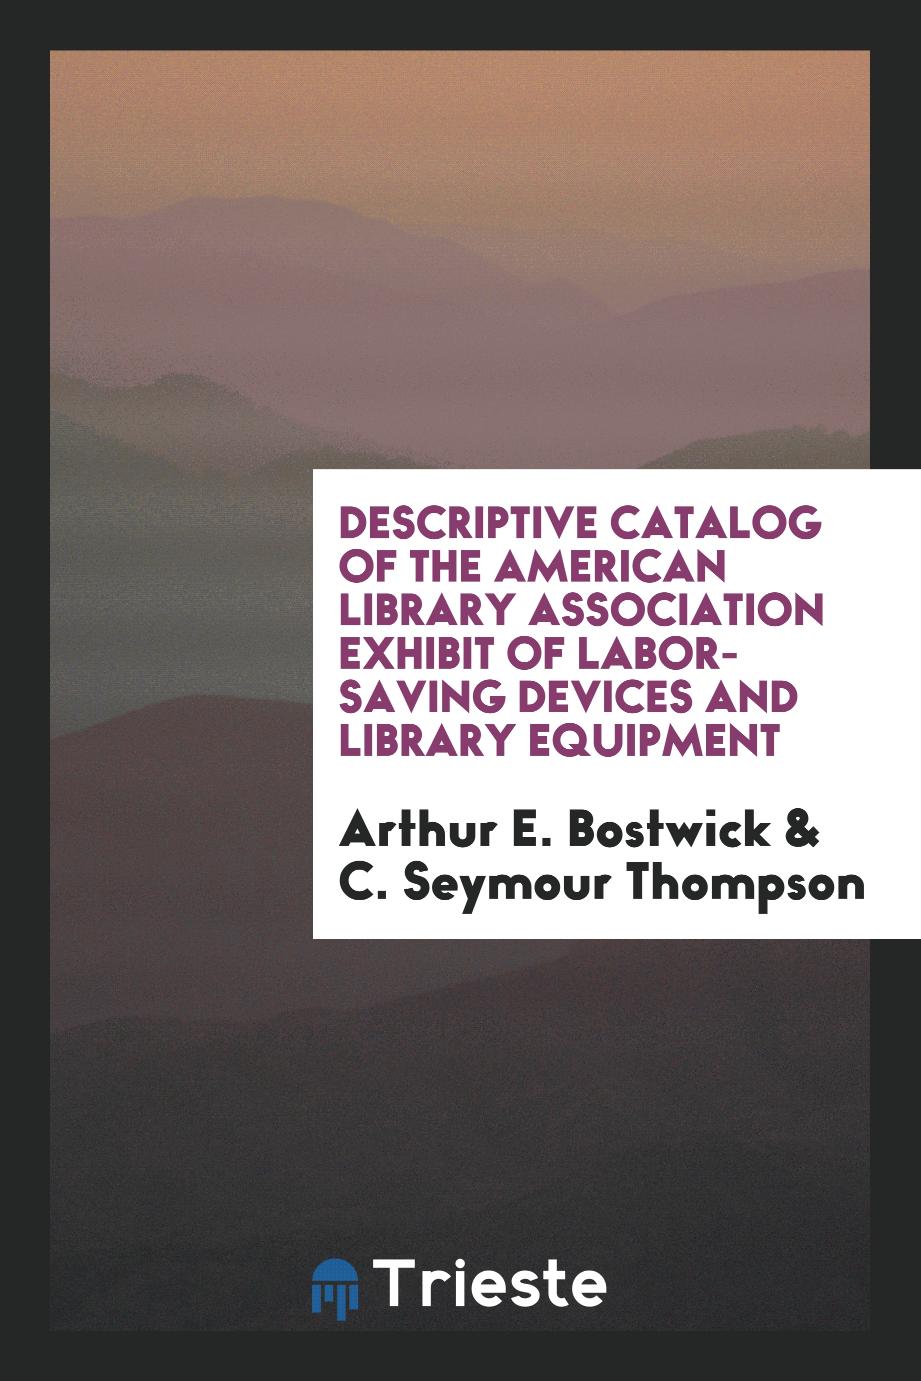 Descriptive catalog of the American library association exhibit of labor-saving devices and library equipment